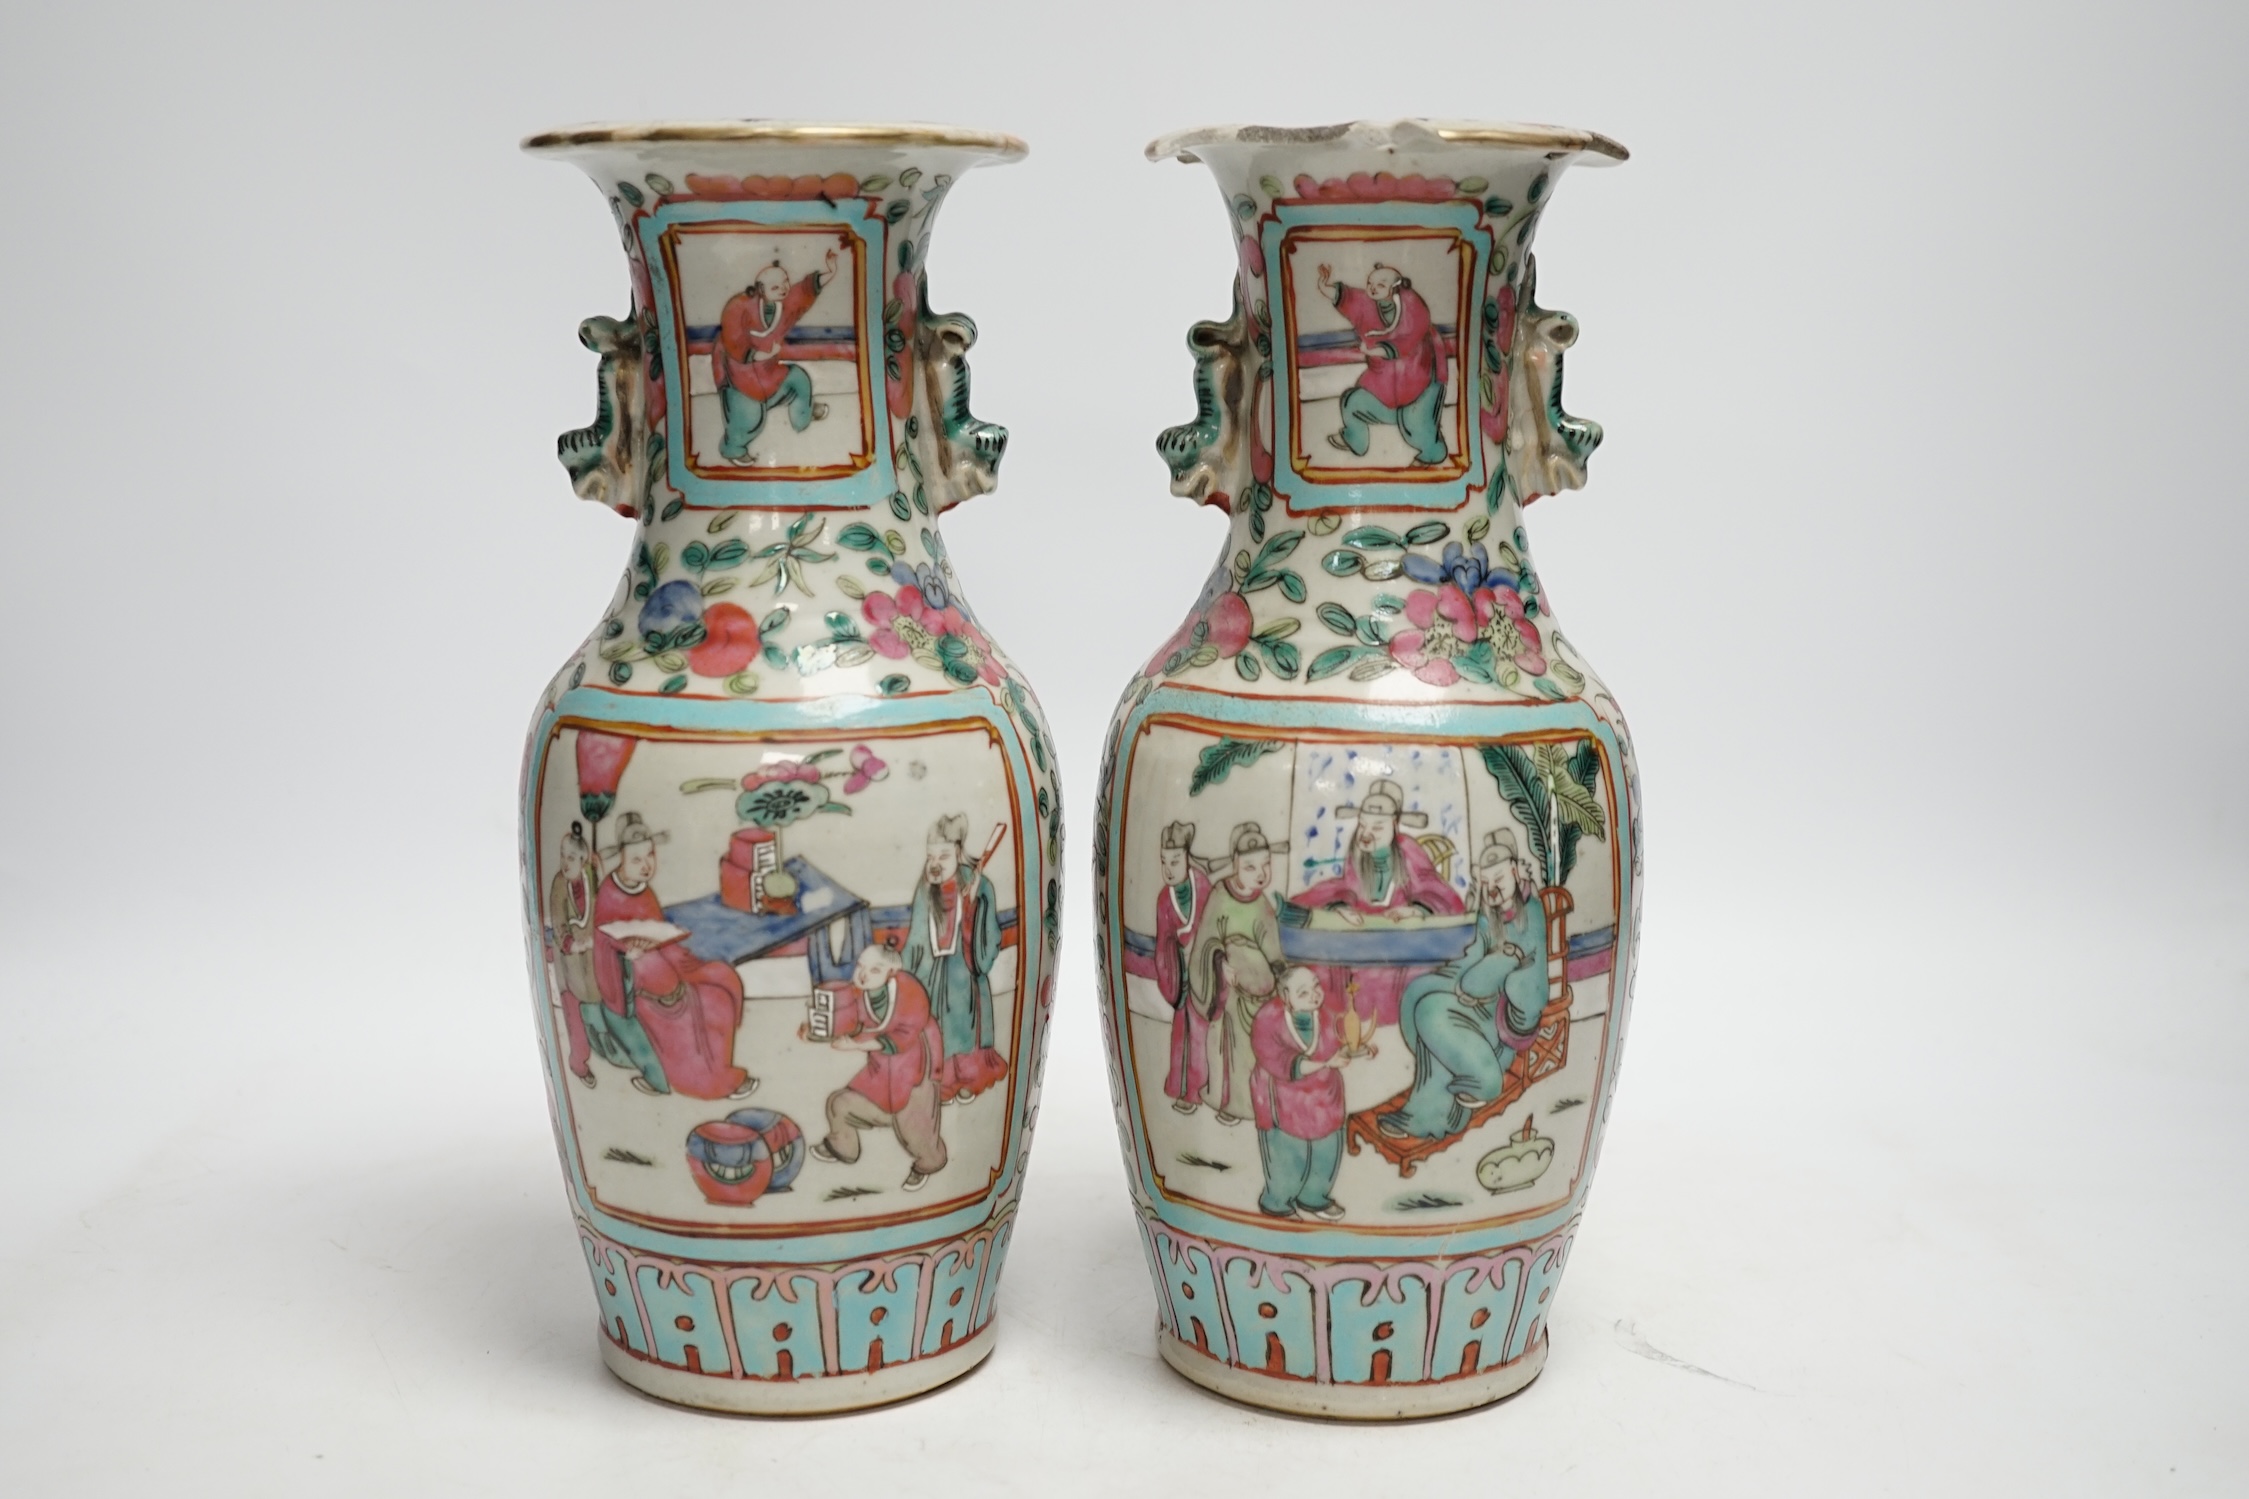 A pair of 19th century Chinese famille rose vases, 25cm high